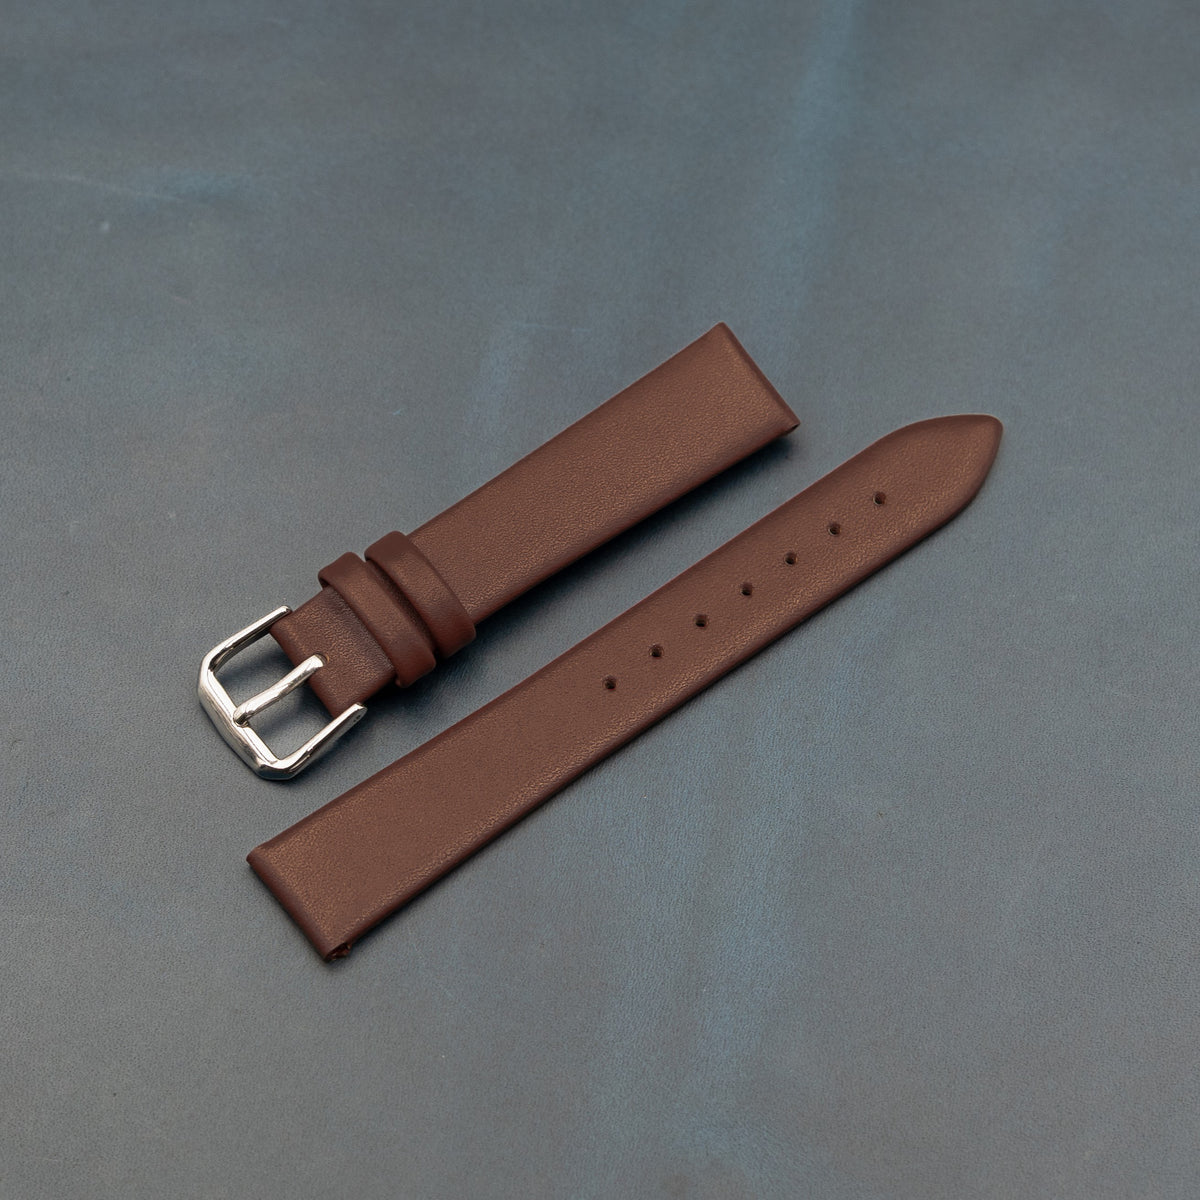 Unstitched Smooth Leather Watch Strap in Tan (12mm)